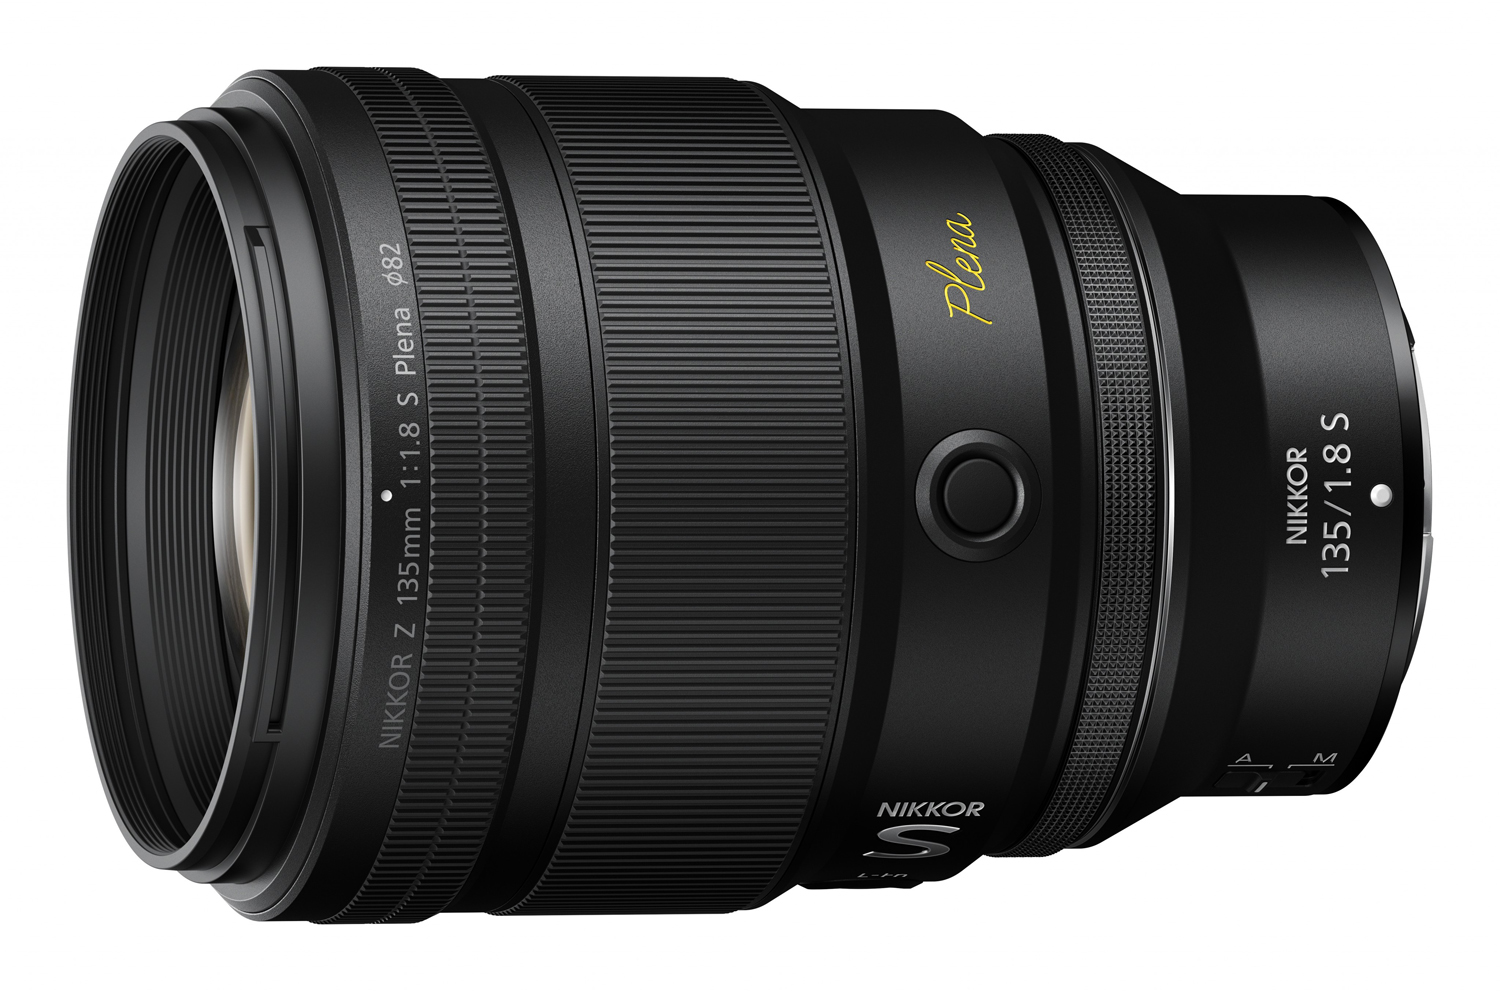 Nikkor Z 135 mm f/1.8 S Plena – view from above.